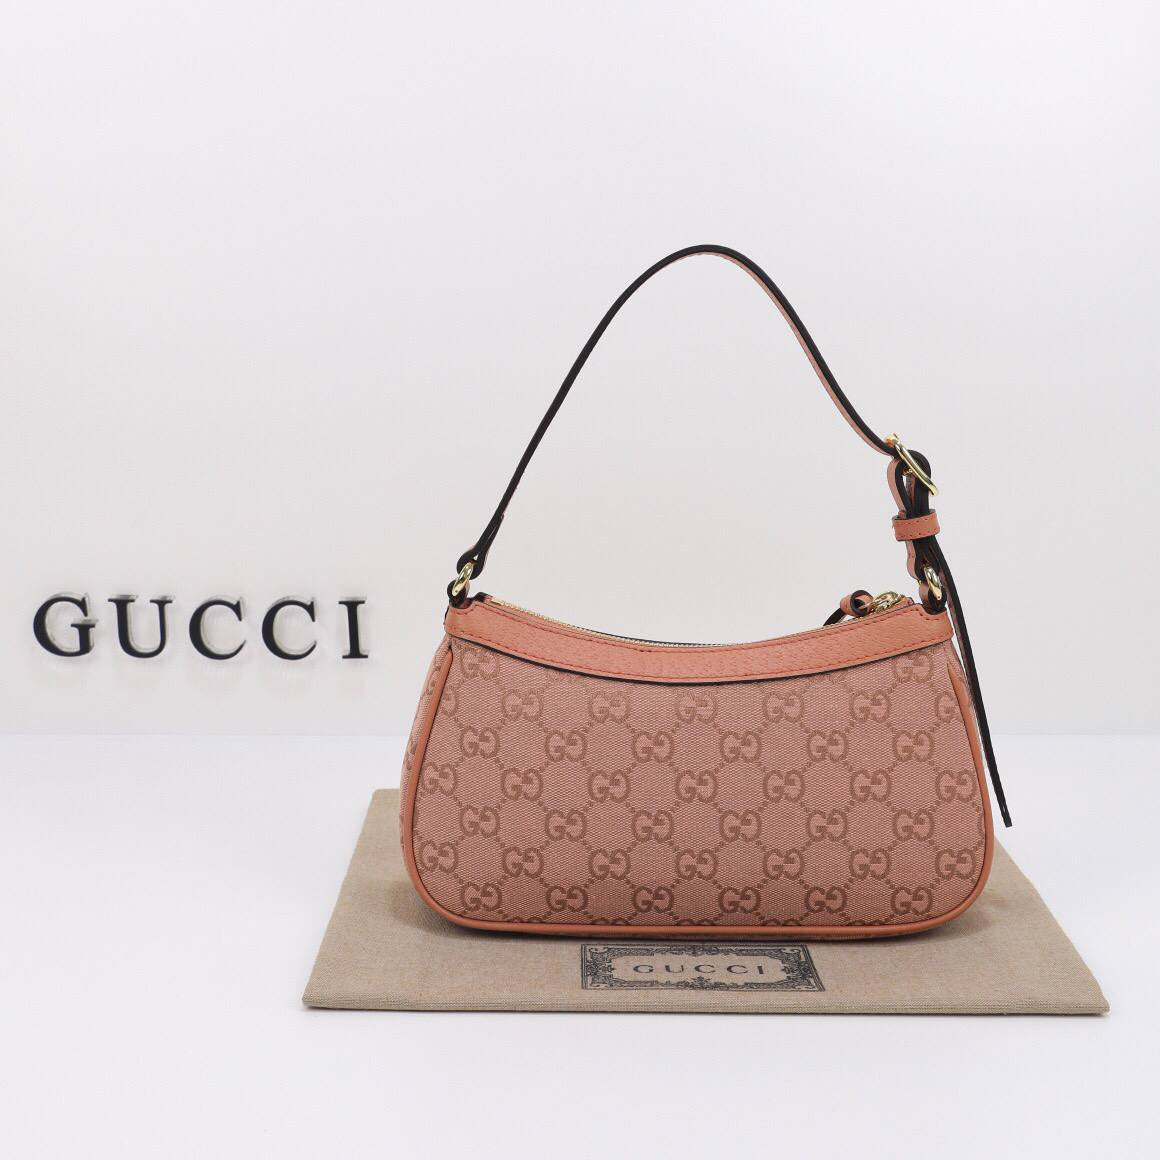 Gucci Ophidia Small GG canvas shoulder bag